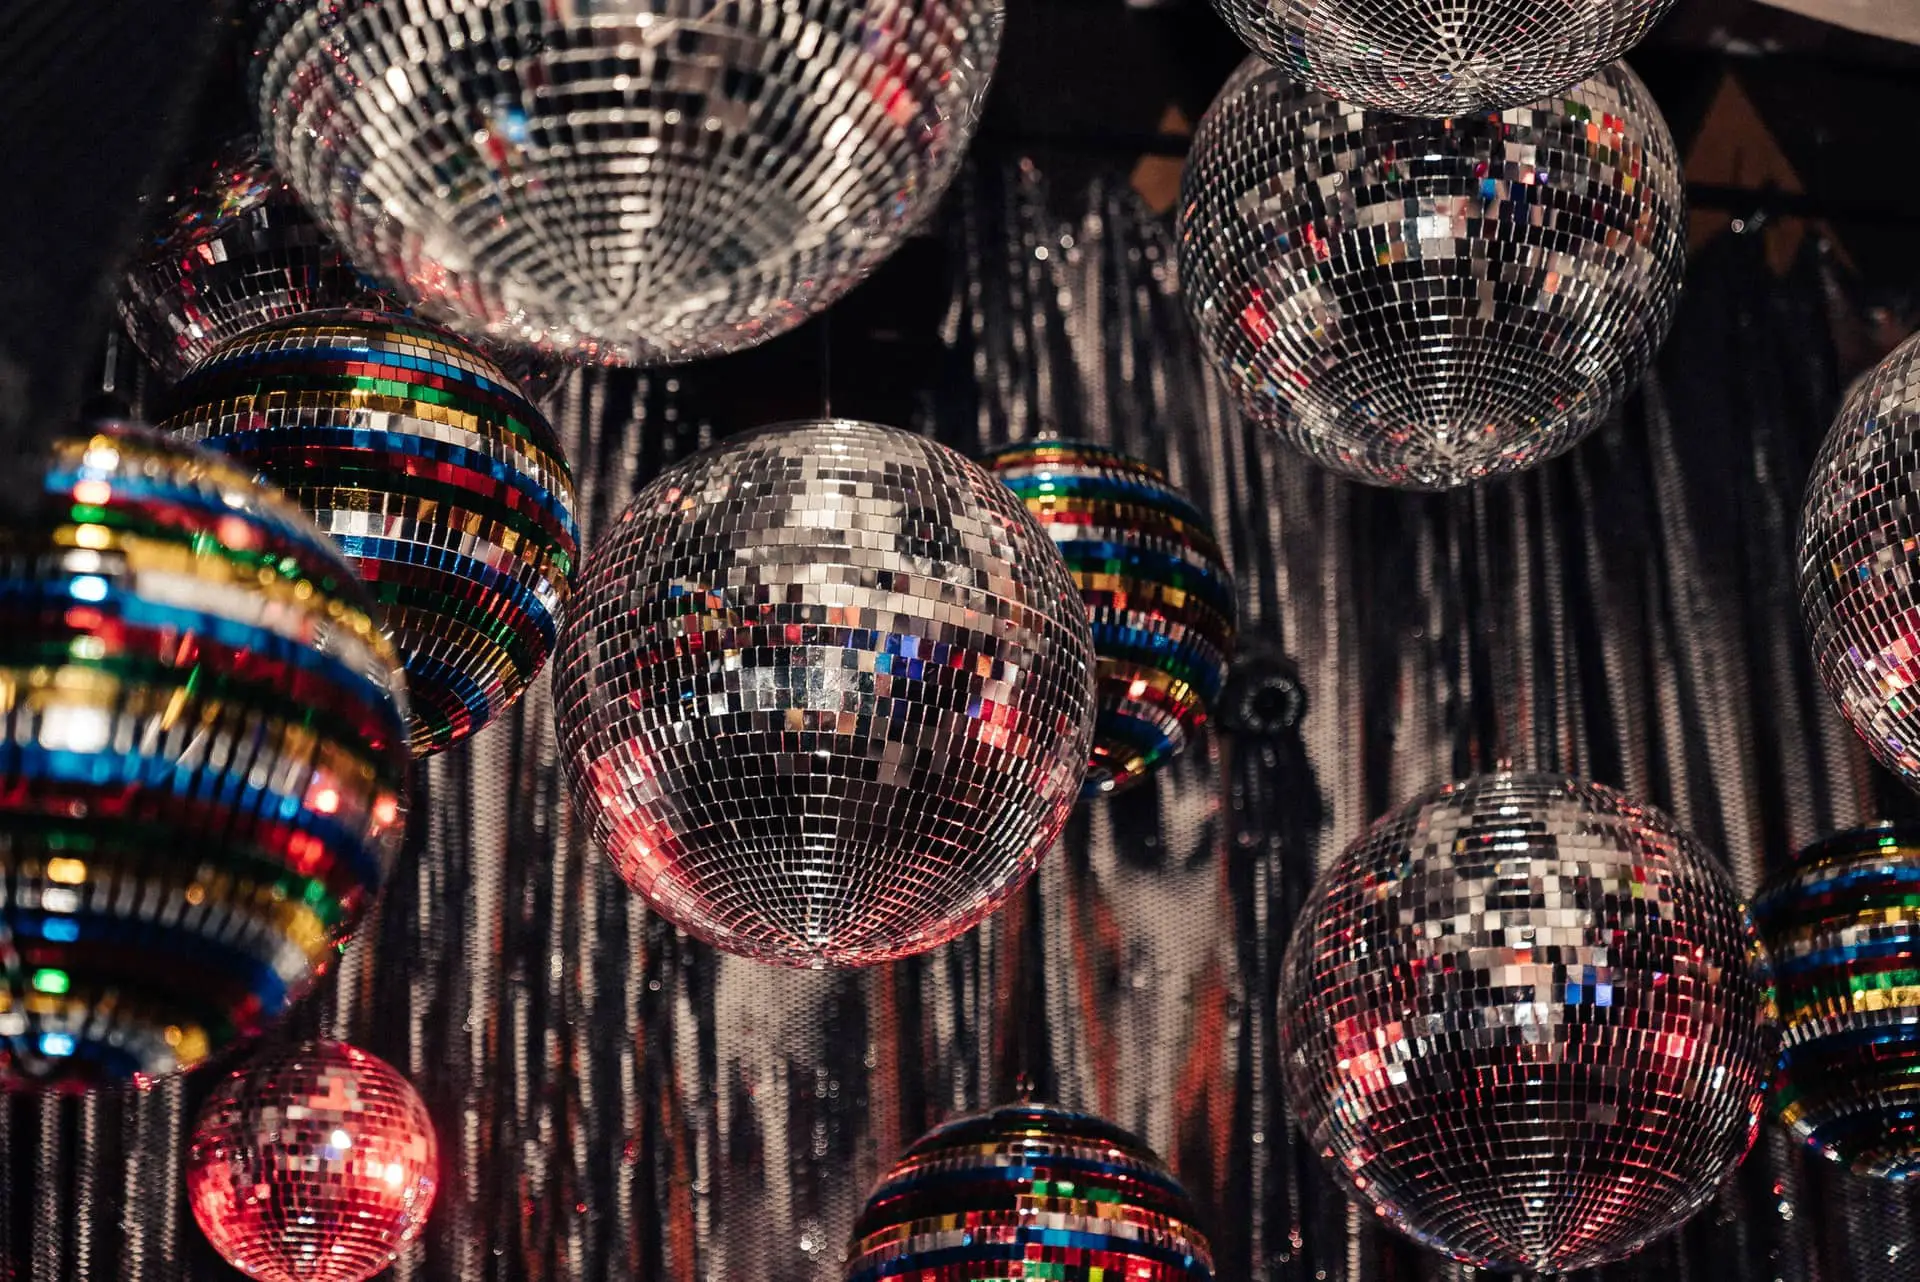 Lots of glitter balls hanging from the ceiling